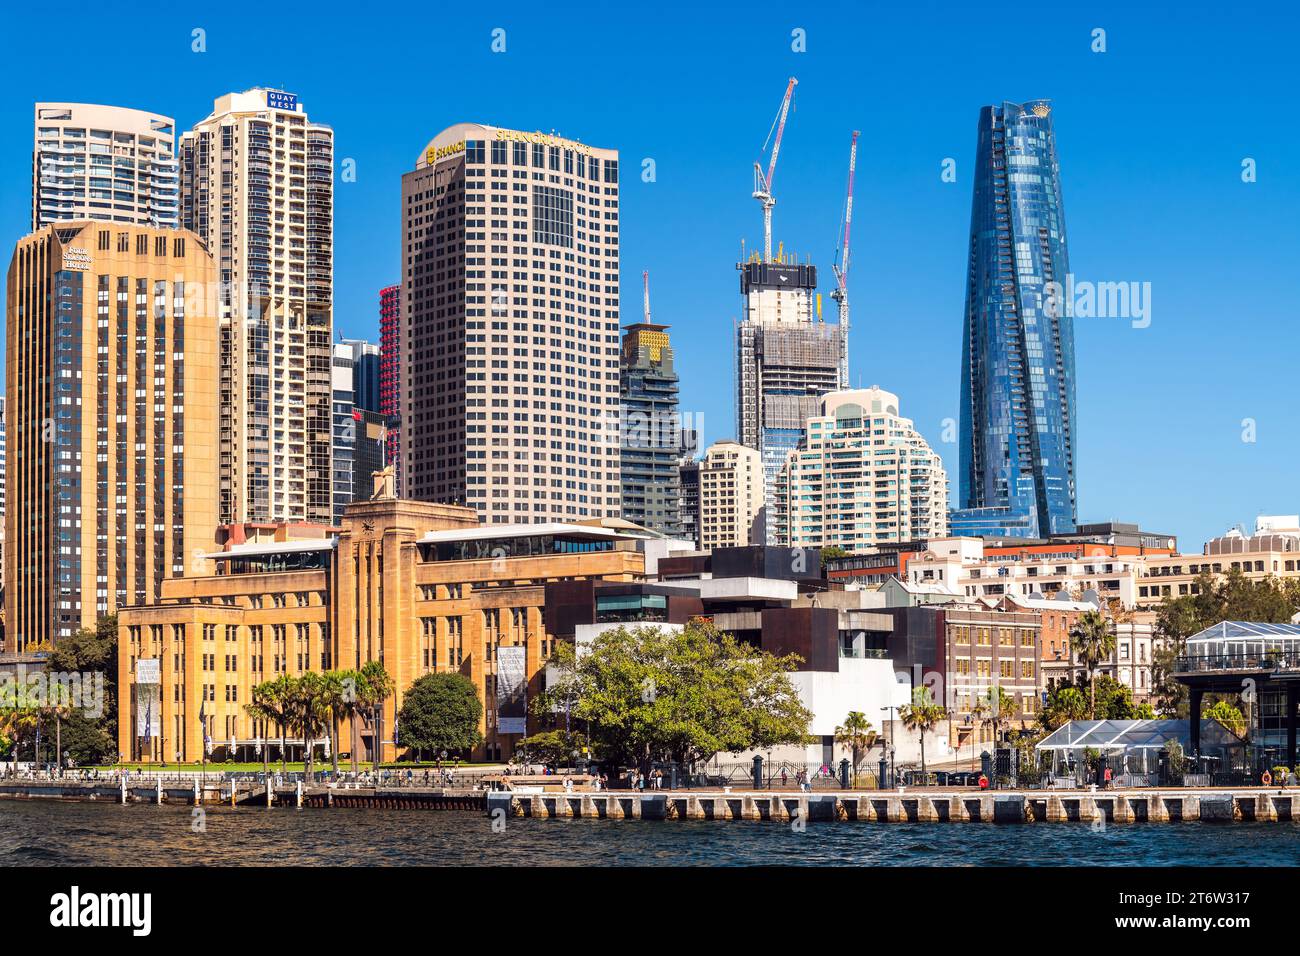 Sydney, Australia - April 17, 2022: Sydney city central business district skyline viewed from a ferry towards the Circular Quay on a sunny day Stock Photo